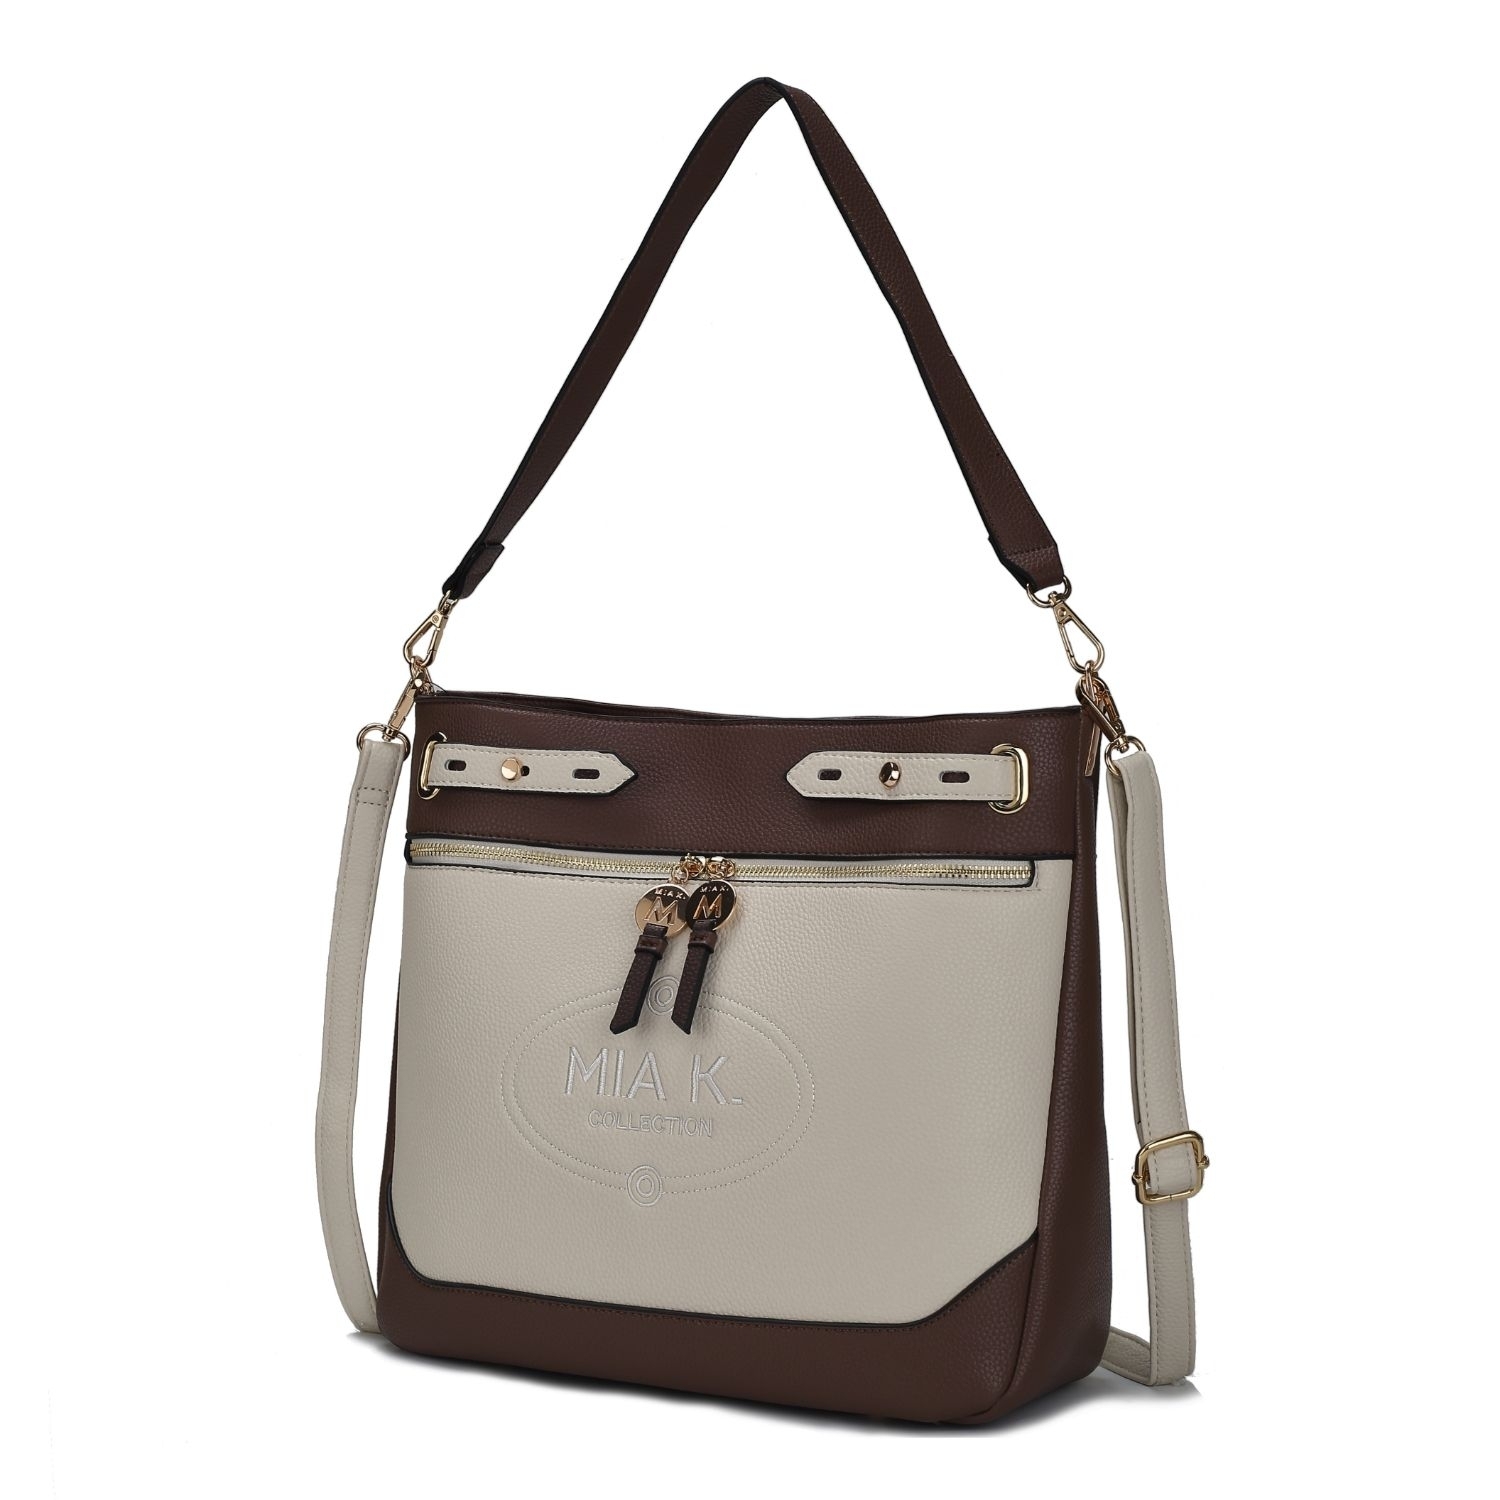 MKF Collection Evie Two-tone Vegan Leather Women's Shoulder Bag By Mia K. - Chocolate-beige